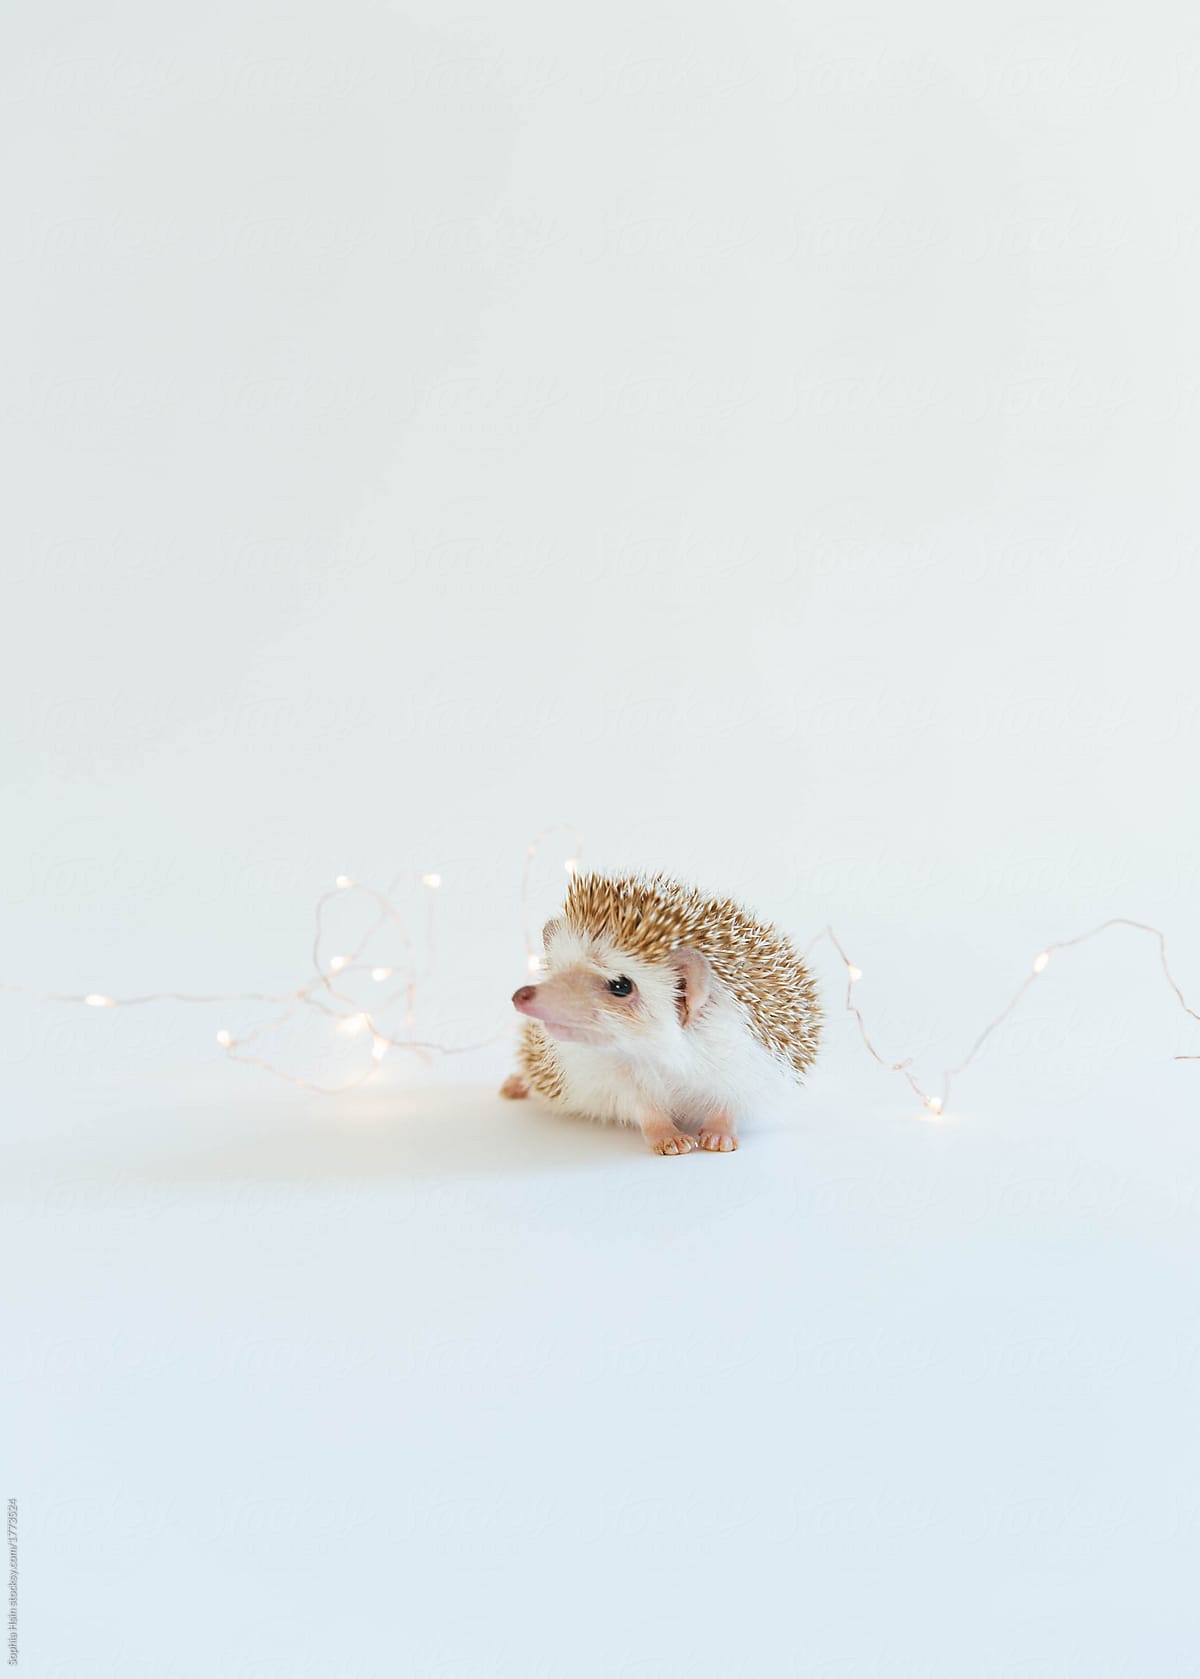 Tiny cute hedgehog surrounded by fairy lights